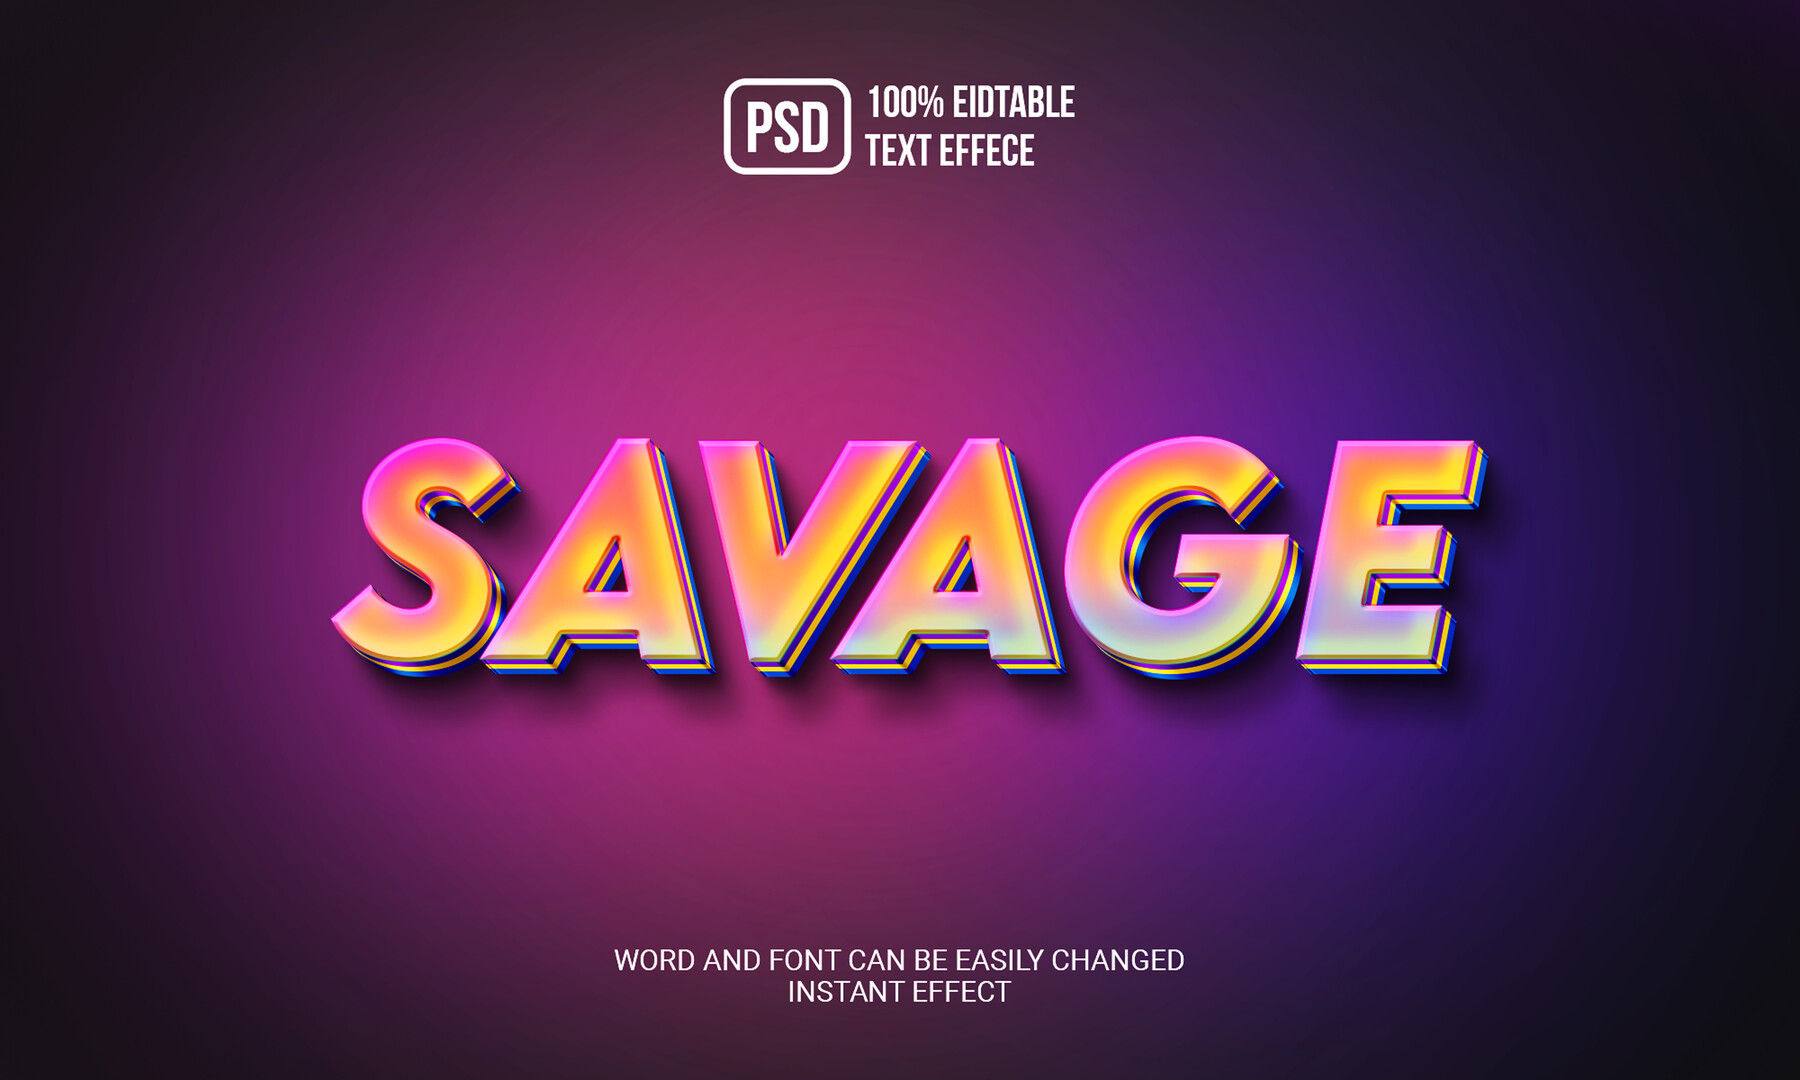 ArtStation - 3D Savage PSD fully editable text effect. Layer style PSD ...